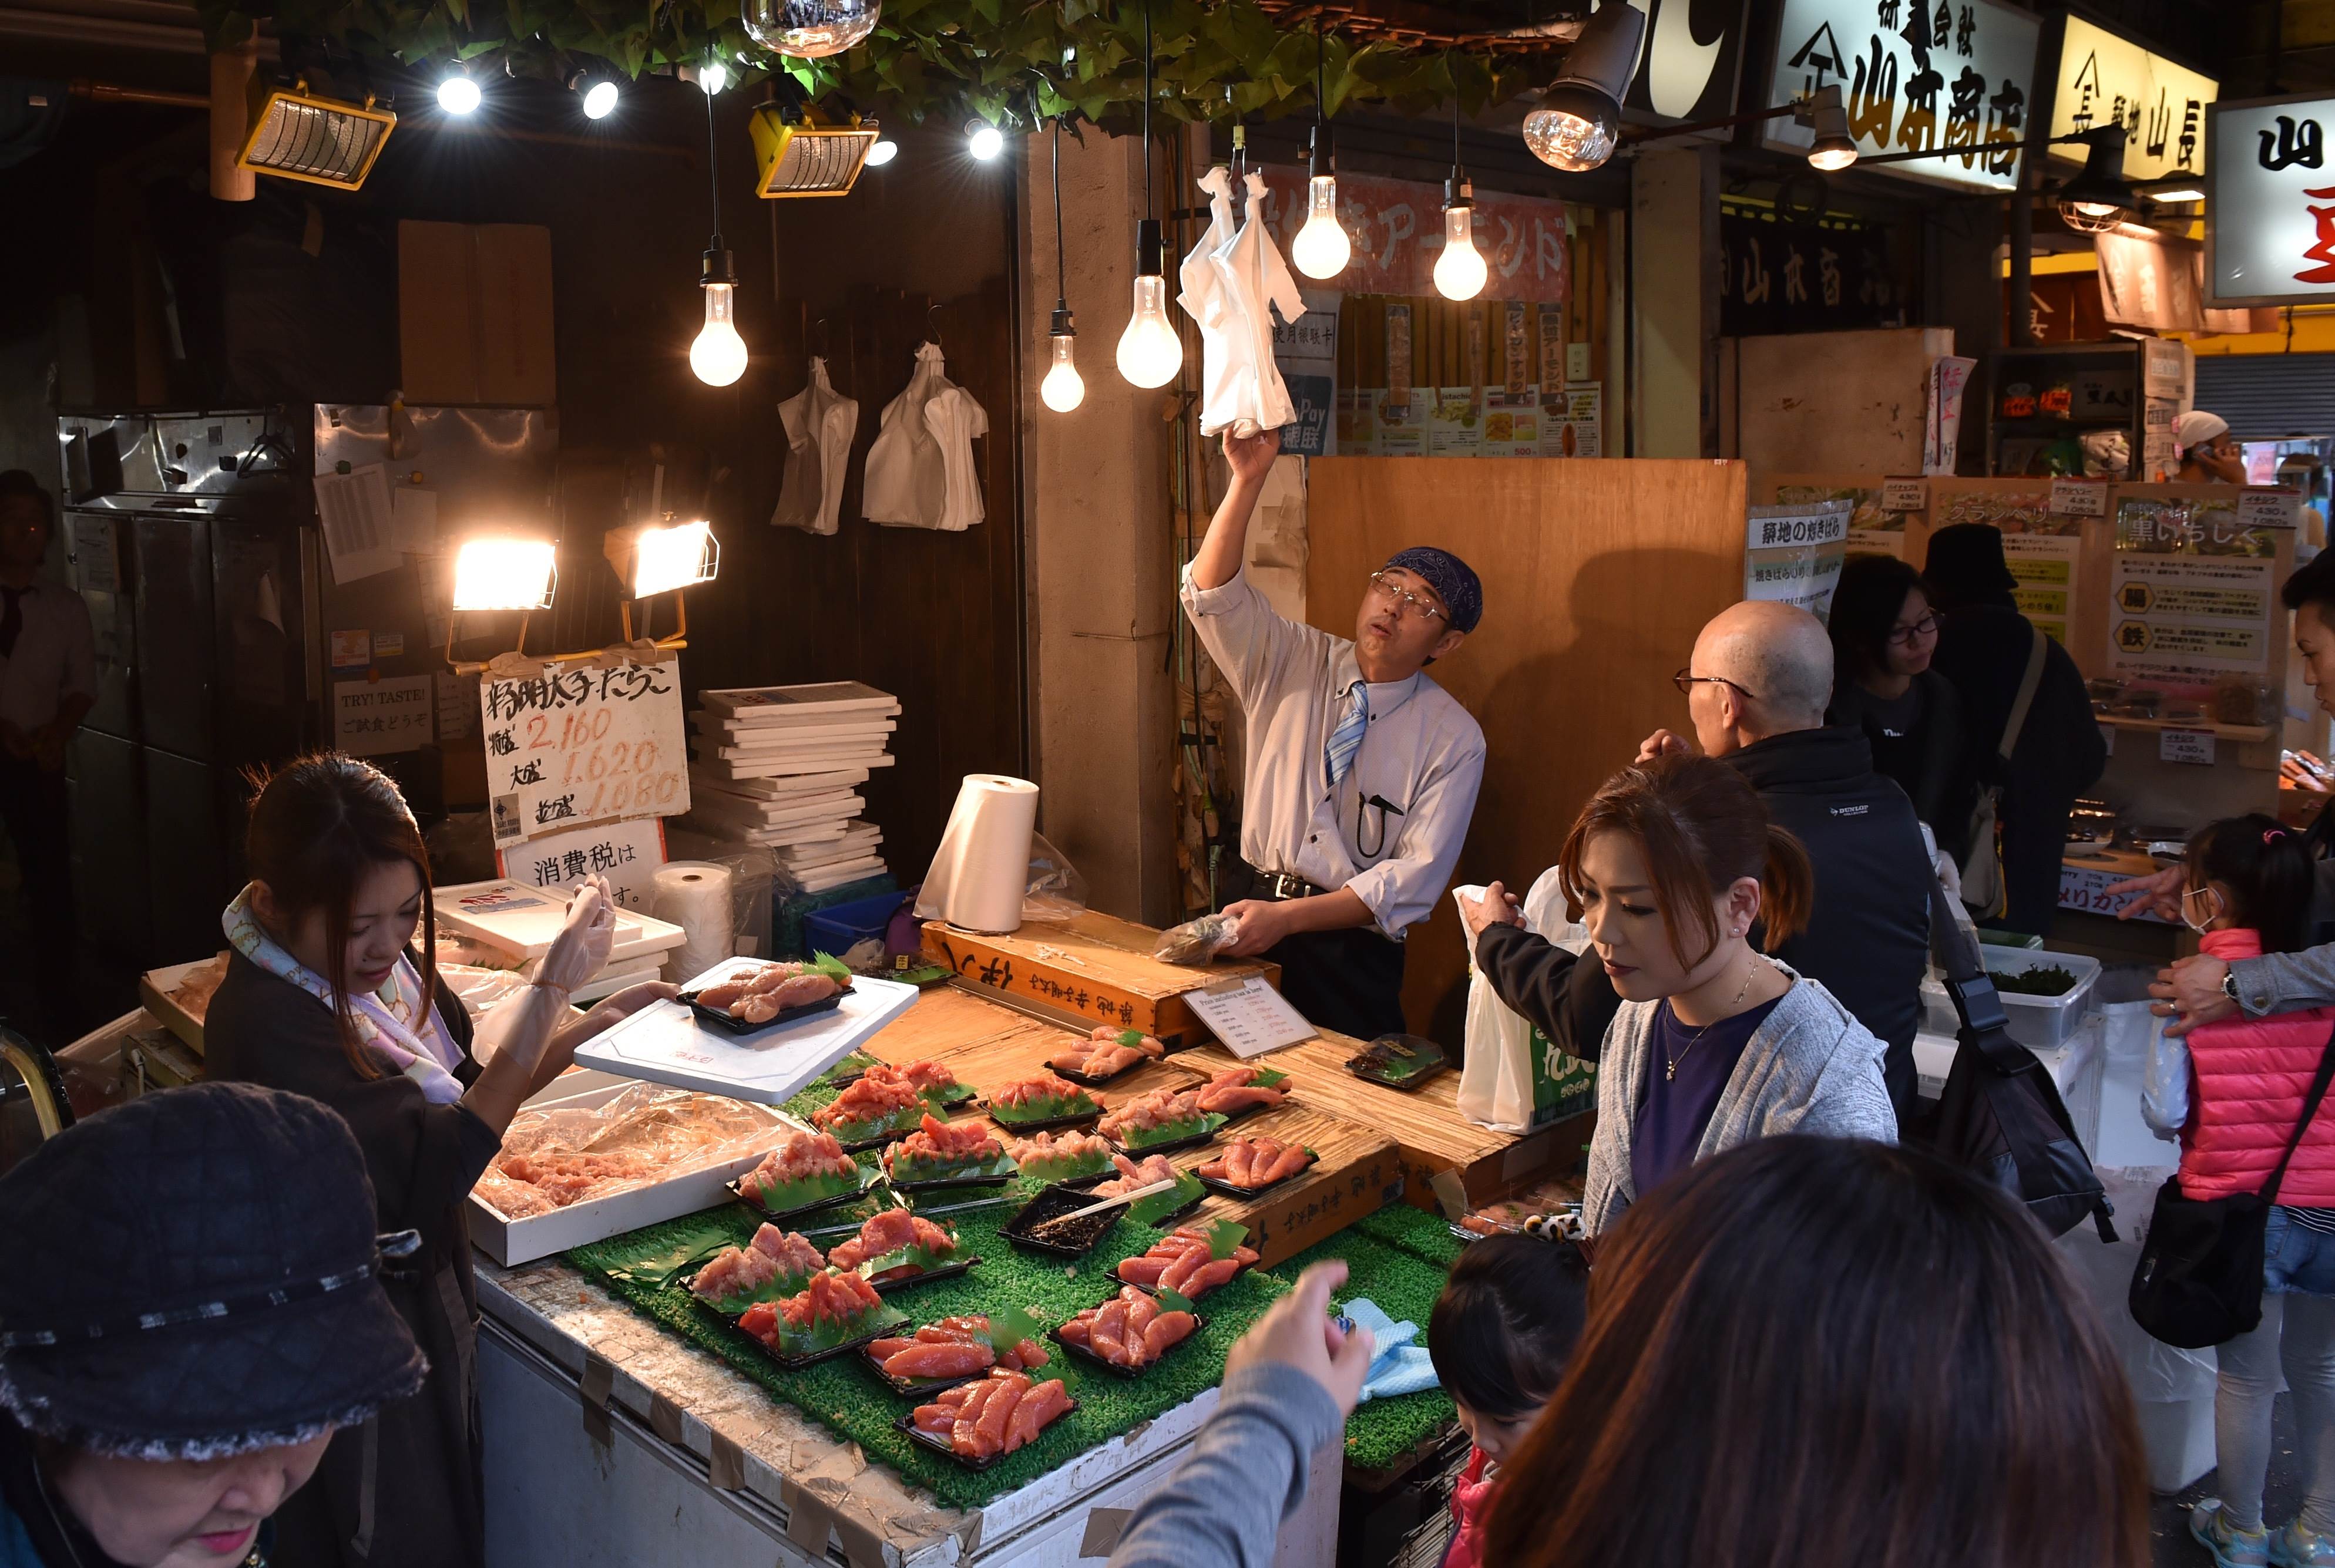 Customers gather around a seafood shop near the Tsukiji Fish Market in Tokyo on November 16, 2015. Japan's economy slipped into recession for the second time since Prime Minister Shinzo Abe came to power nearly three years ago on a vow to revive growth and end chronic deflation, government figures showed November 16. AFP PHOTO / KAZUHIRO NOGI